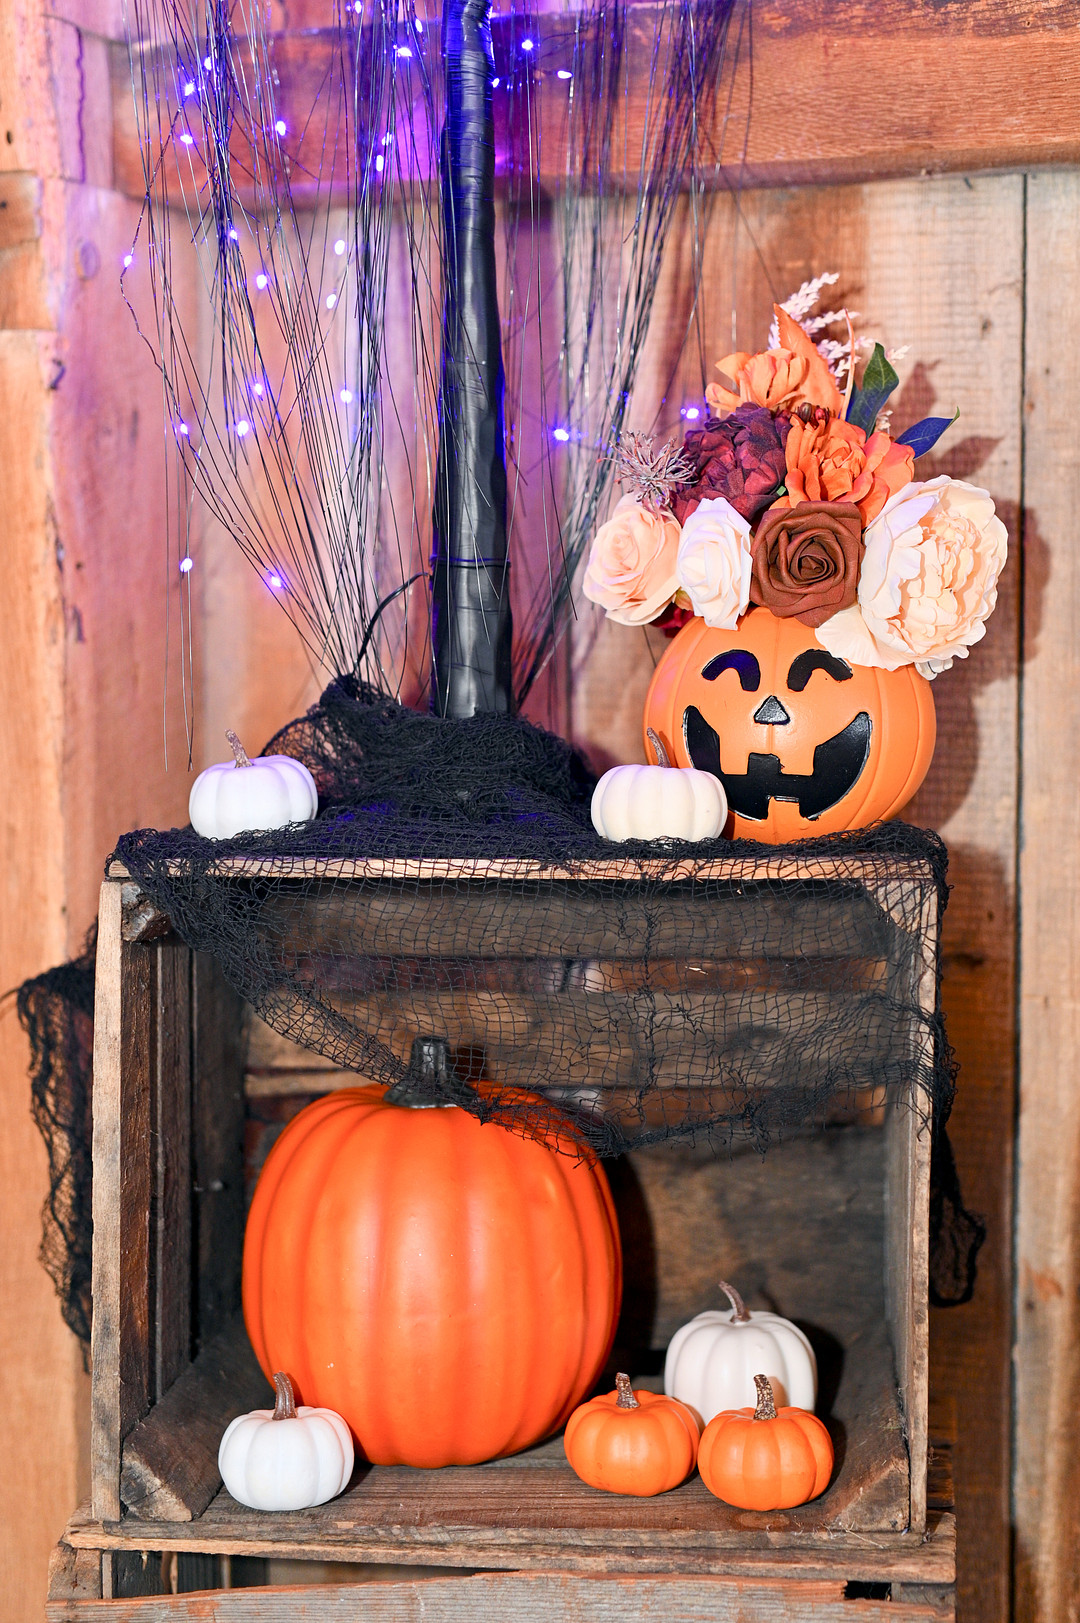 Halloween Themed Wedding At An Orchard 263